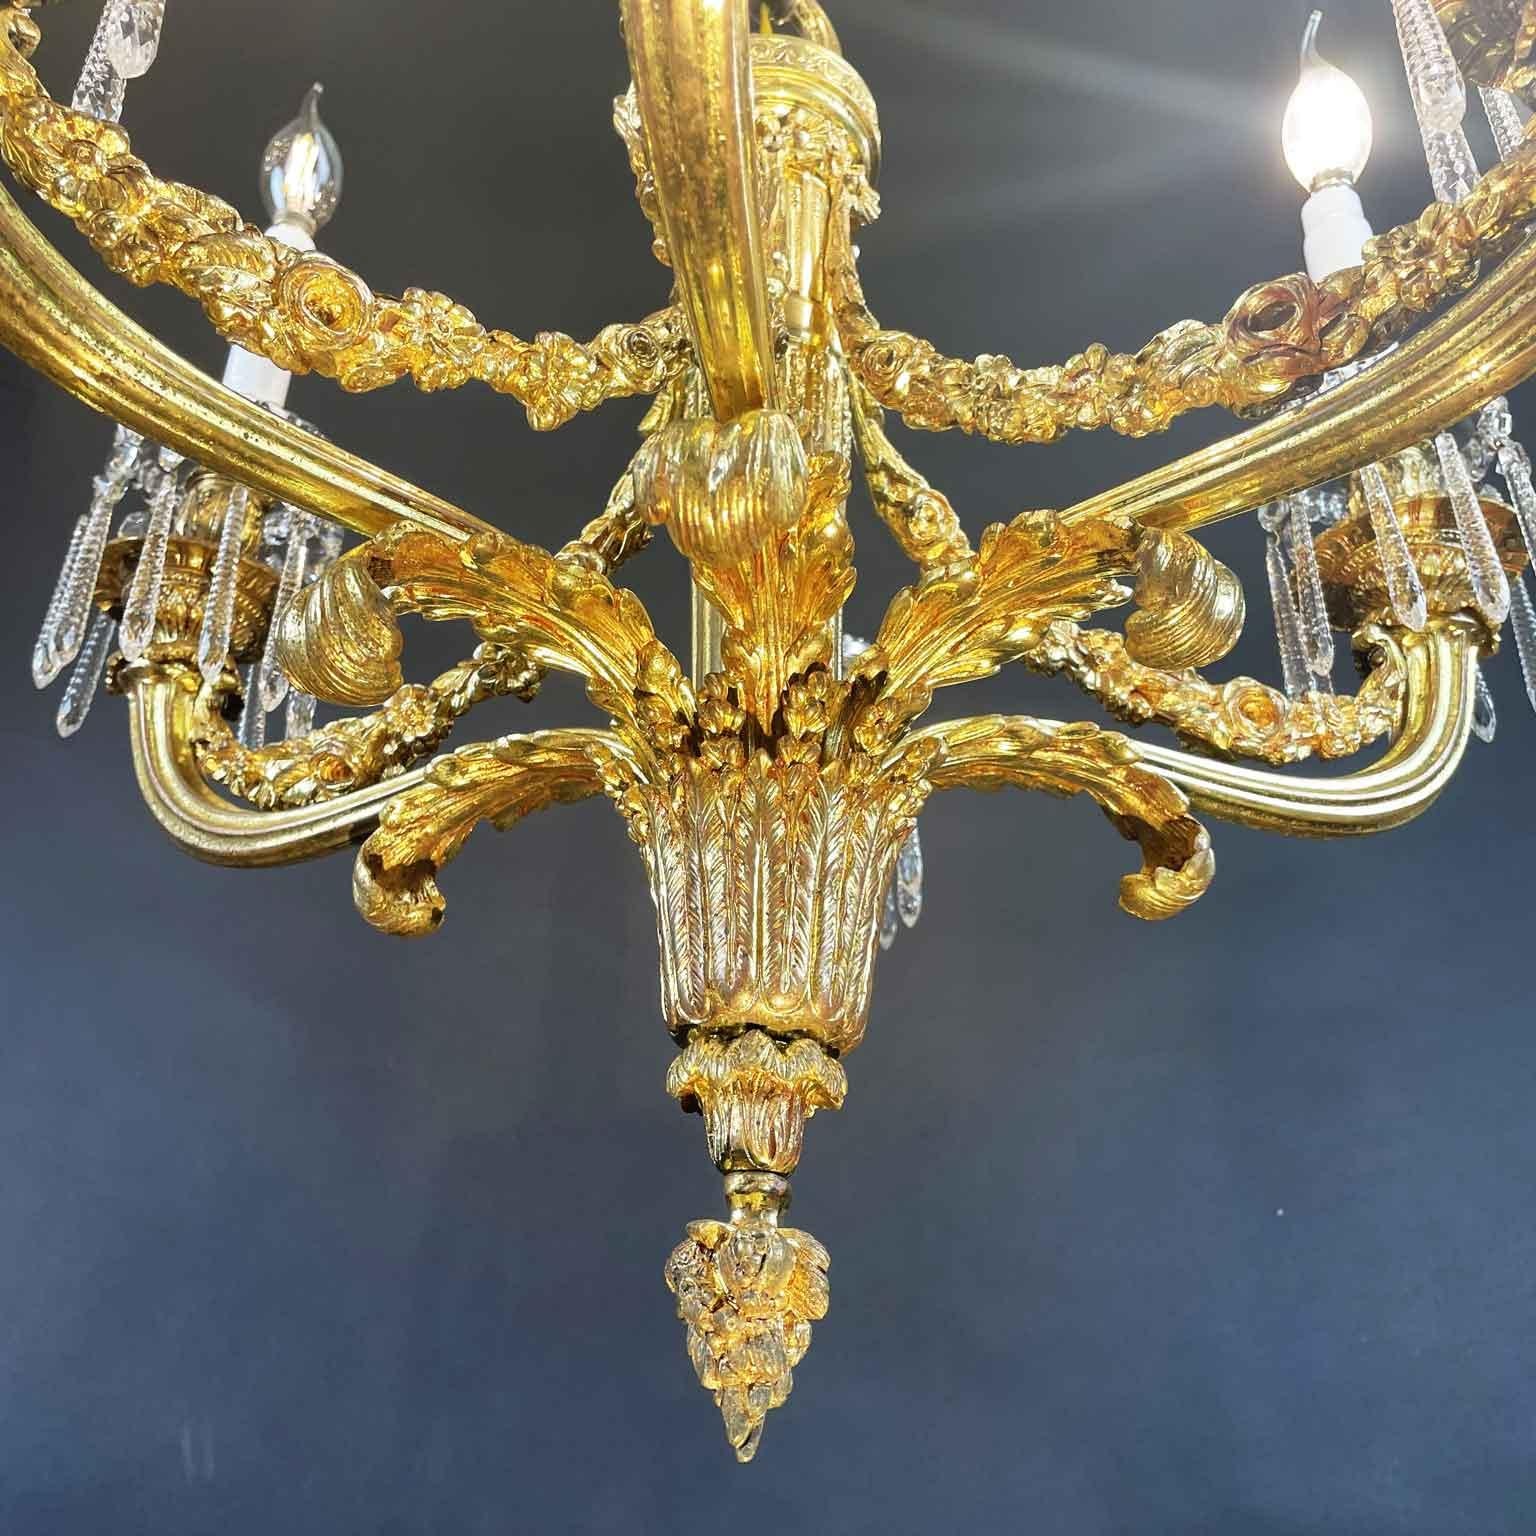 Baccarat Crystal and Ormolu Chandelier French 20th Century Empire Style Pendant 3